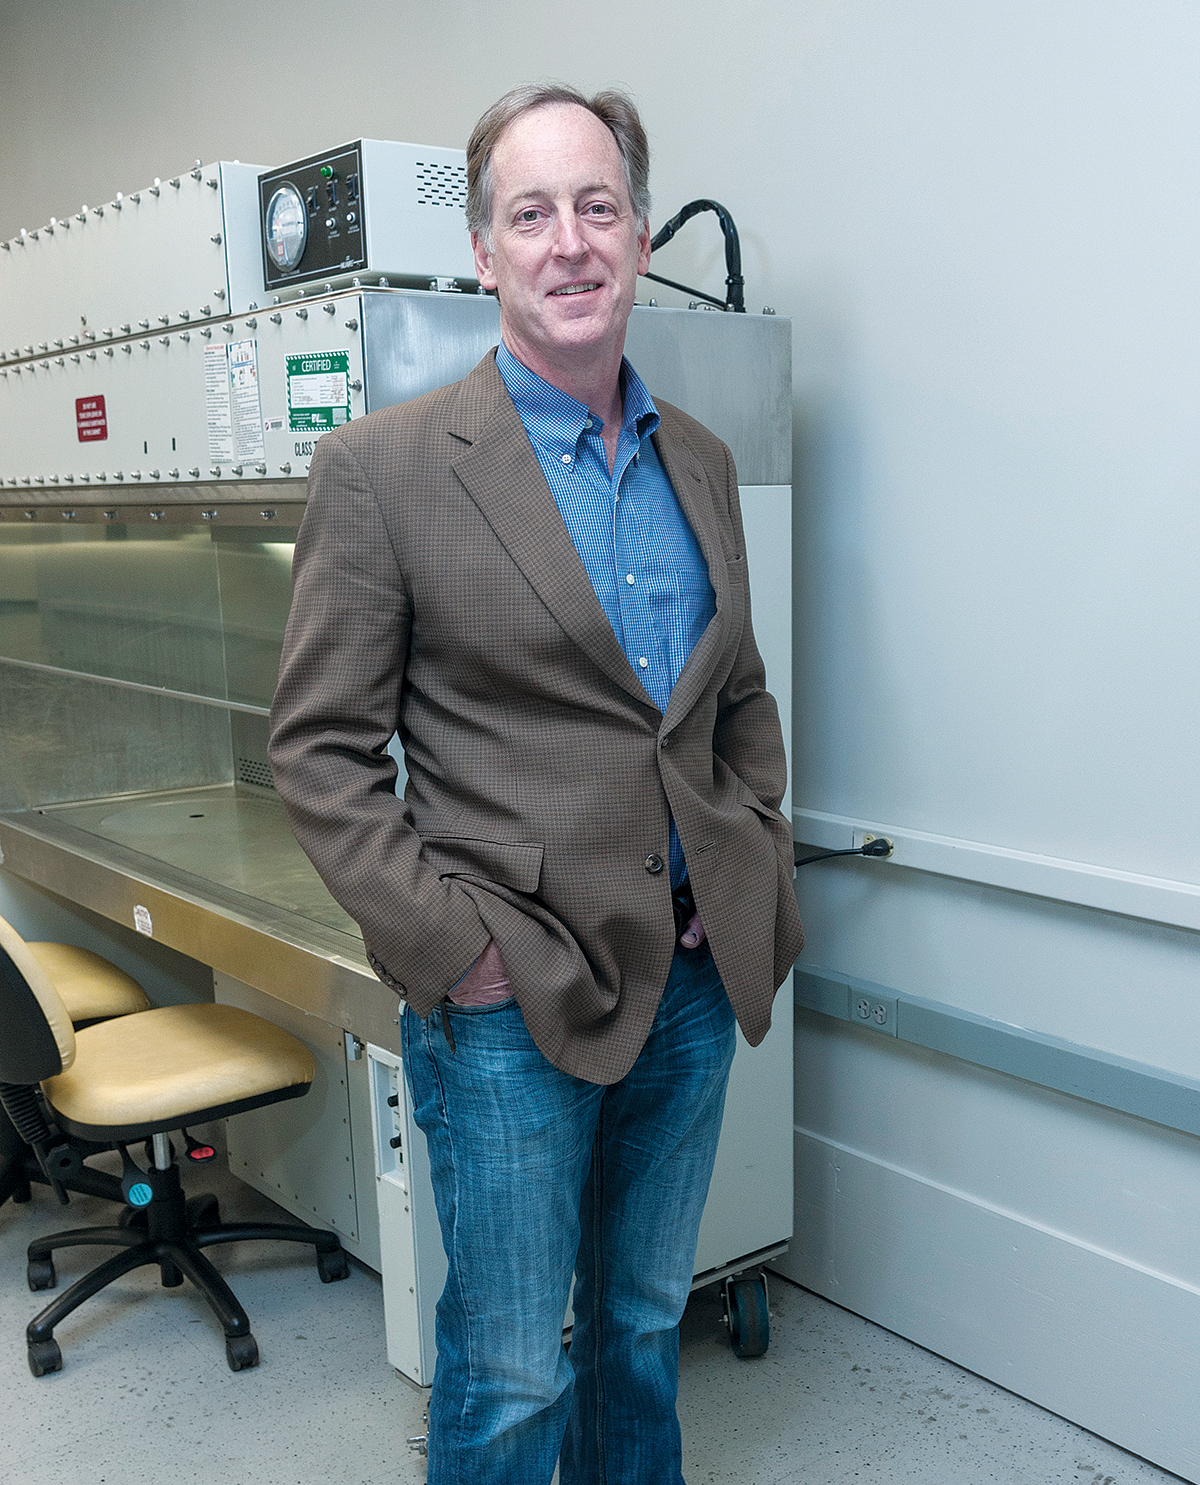 While he has a long history as an entrepreneur in Rhode Island, John D. Jarrell made a big splash recently when he opened the state’s only commercial wet-lab space on spec in Coventry in a former GTECH facility.  / PBN PHOTO/MICHAEL SALERNO